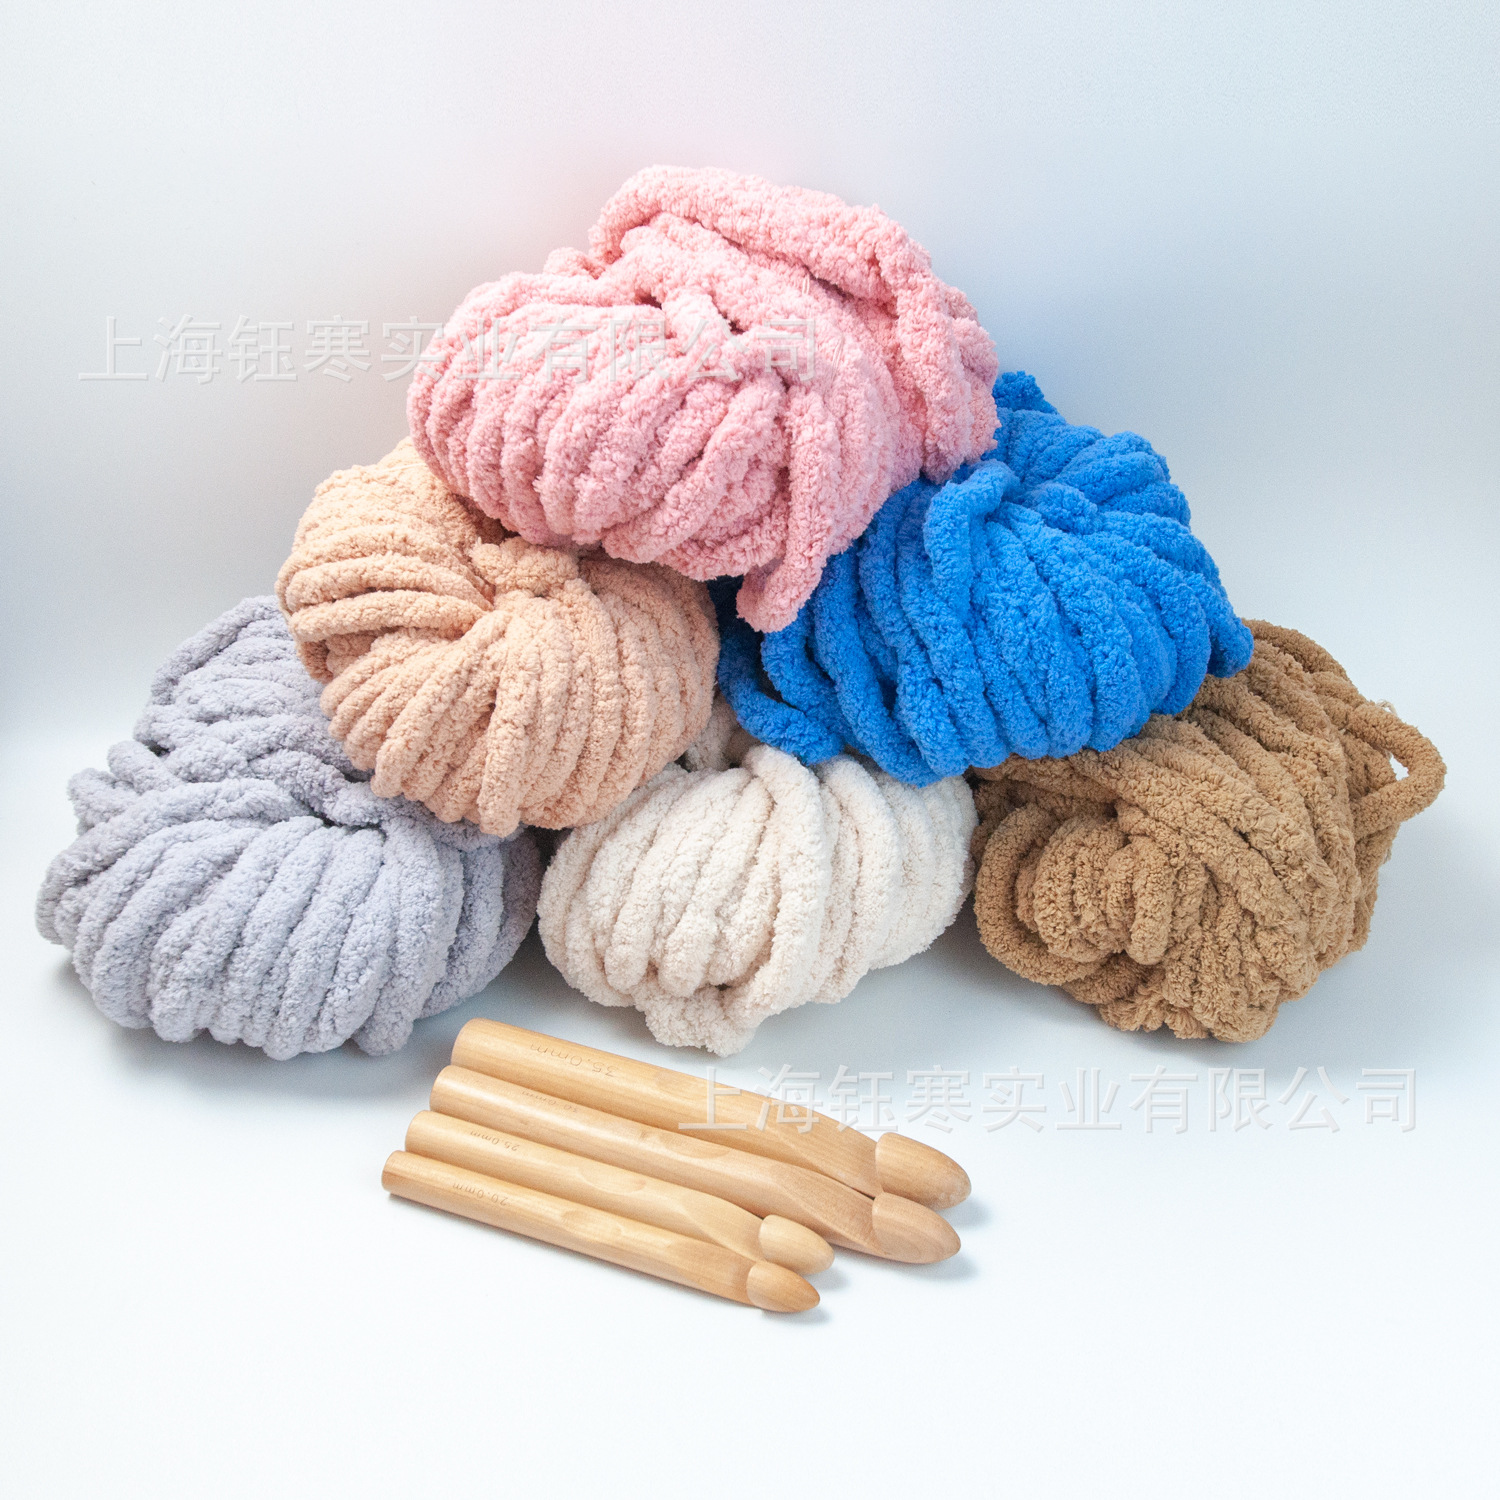  Chunky Blanket Chenille Yarn 48OZ for Arm Knitting, Stripes  Multicolored Pink Gray Polyester Jumbo Super Bulky Easy Weaving Multicolor  Yarn 6 Pack Luxury Qucik Thick Yarns